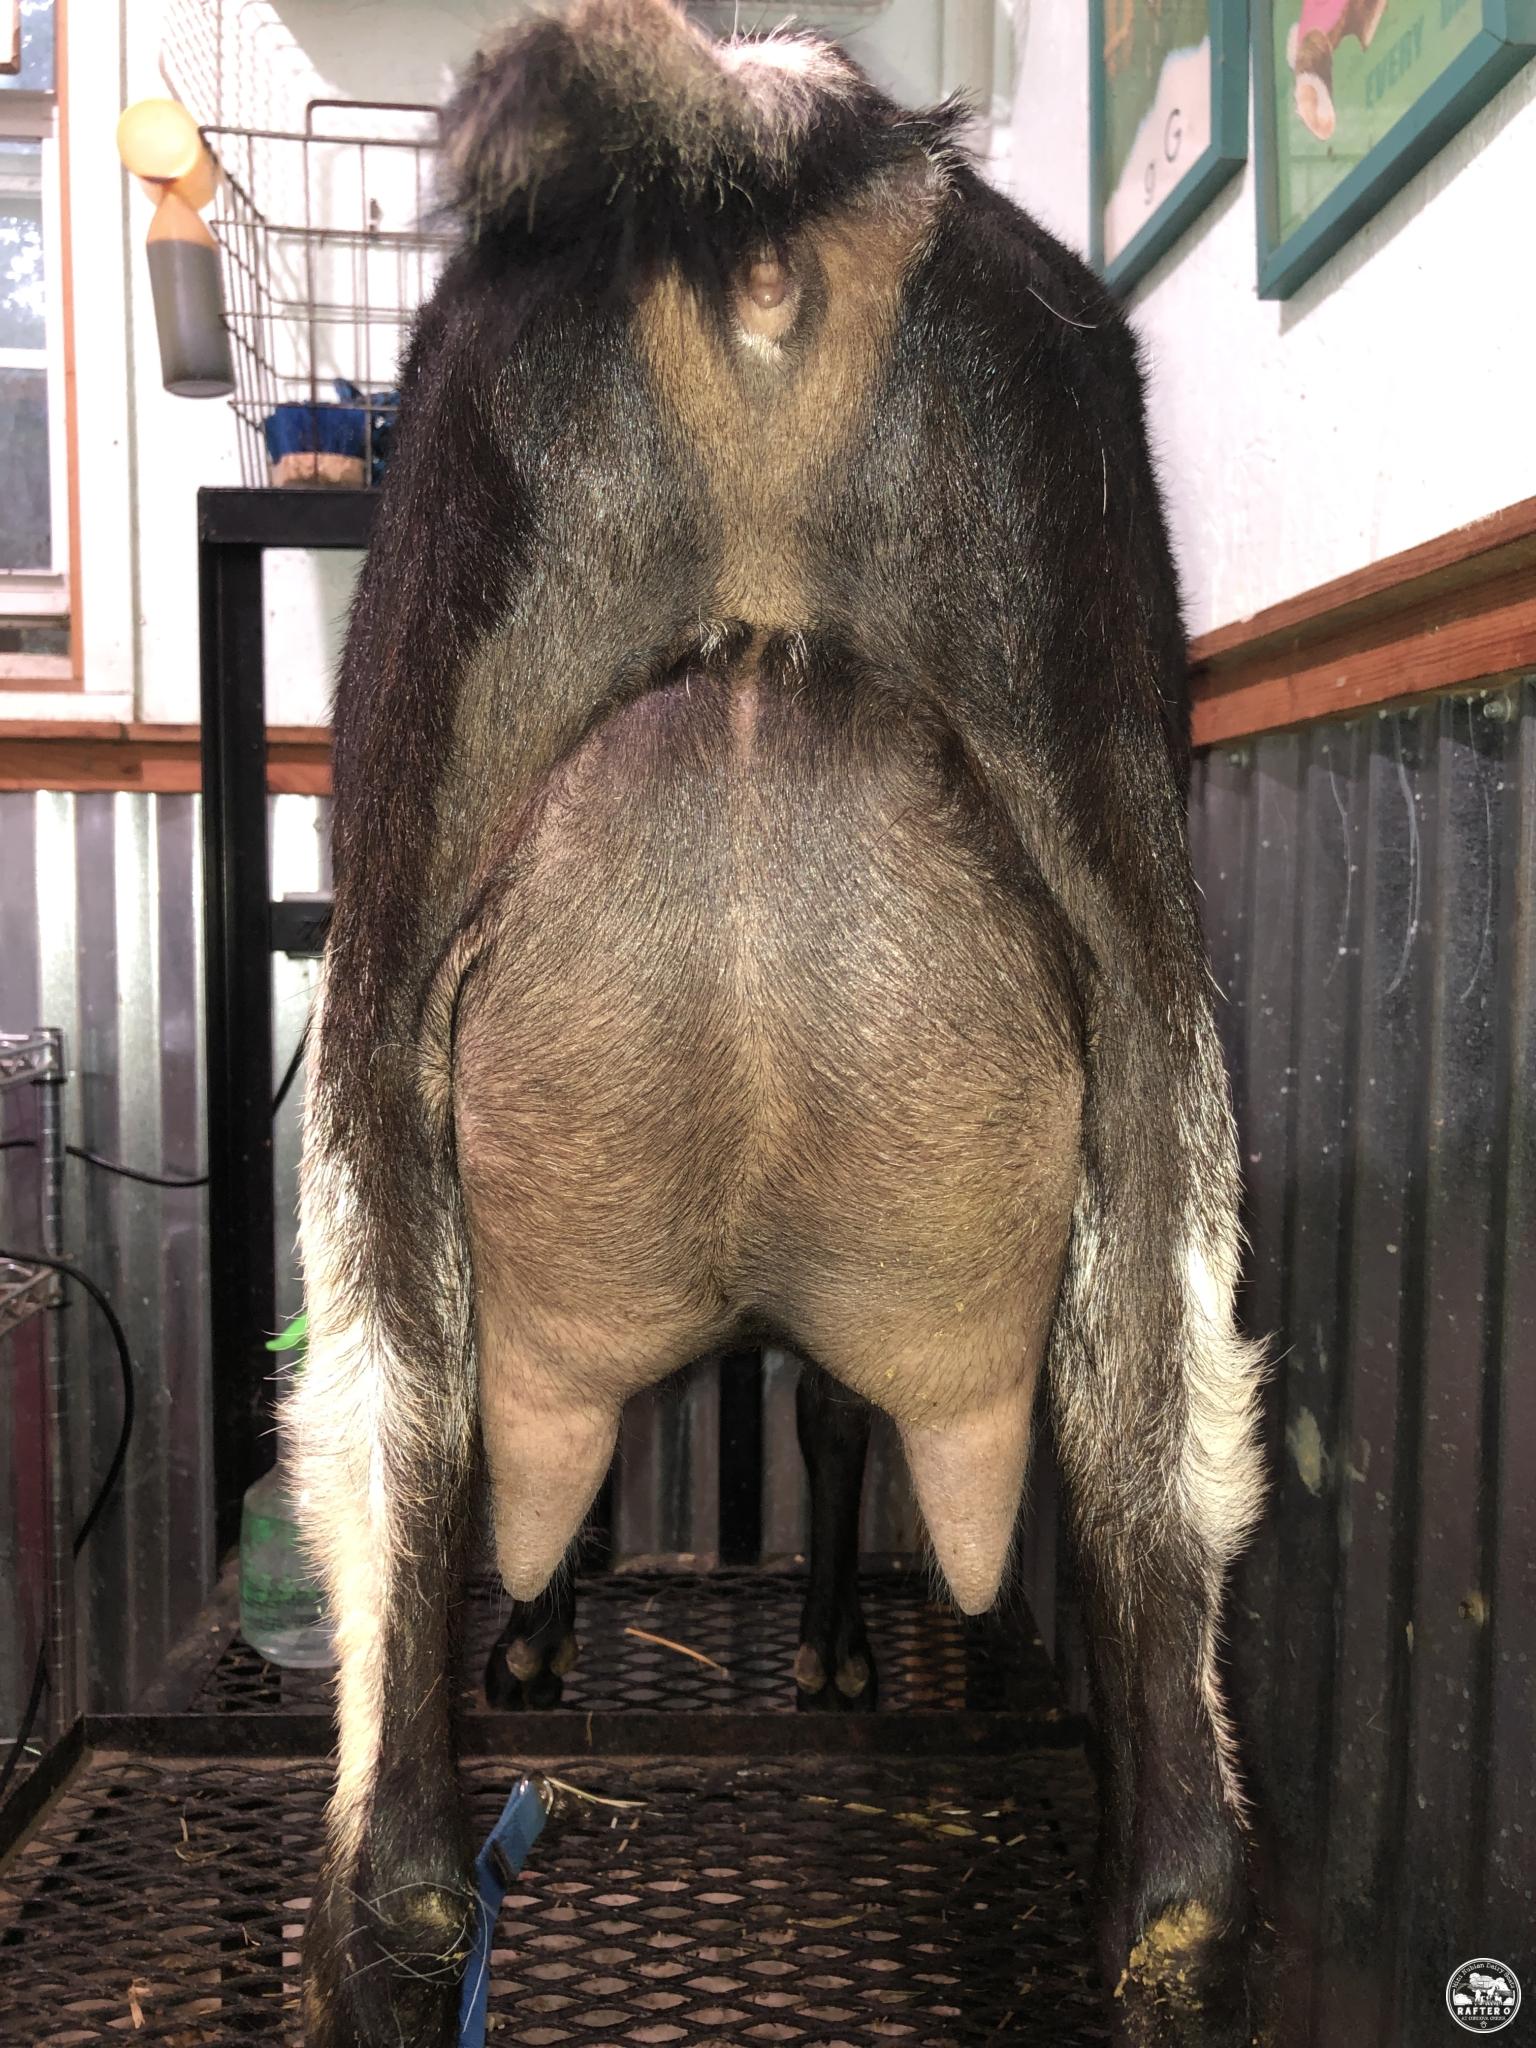 Dam: Nomad Once in a Blue Moon Rear Udder